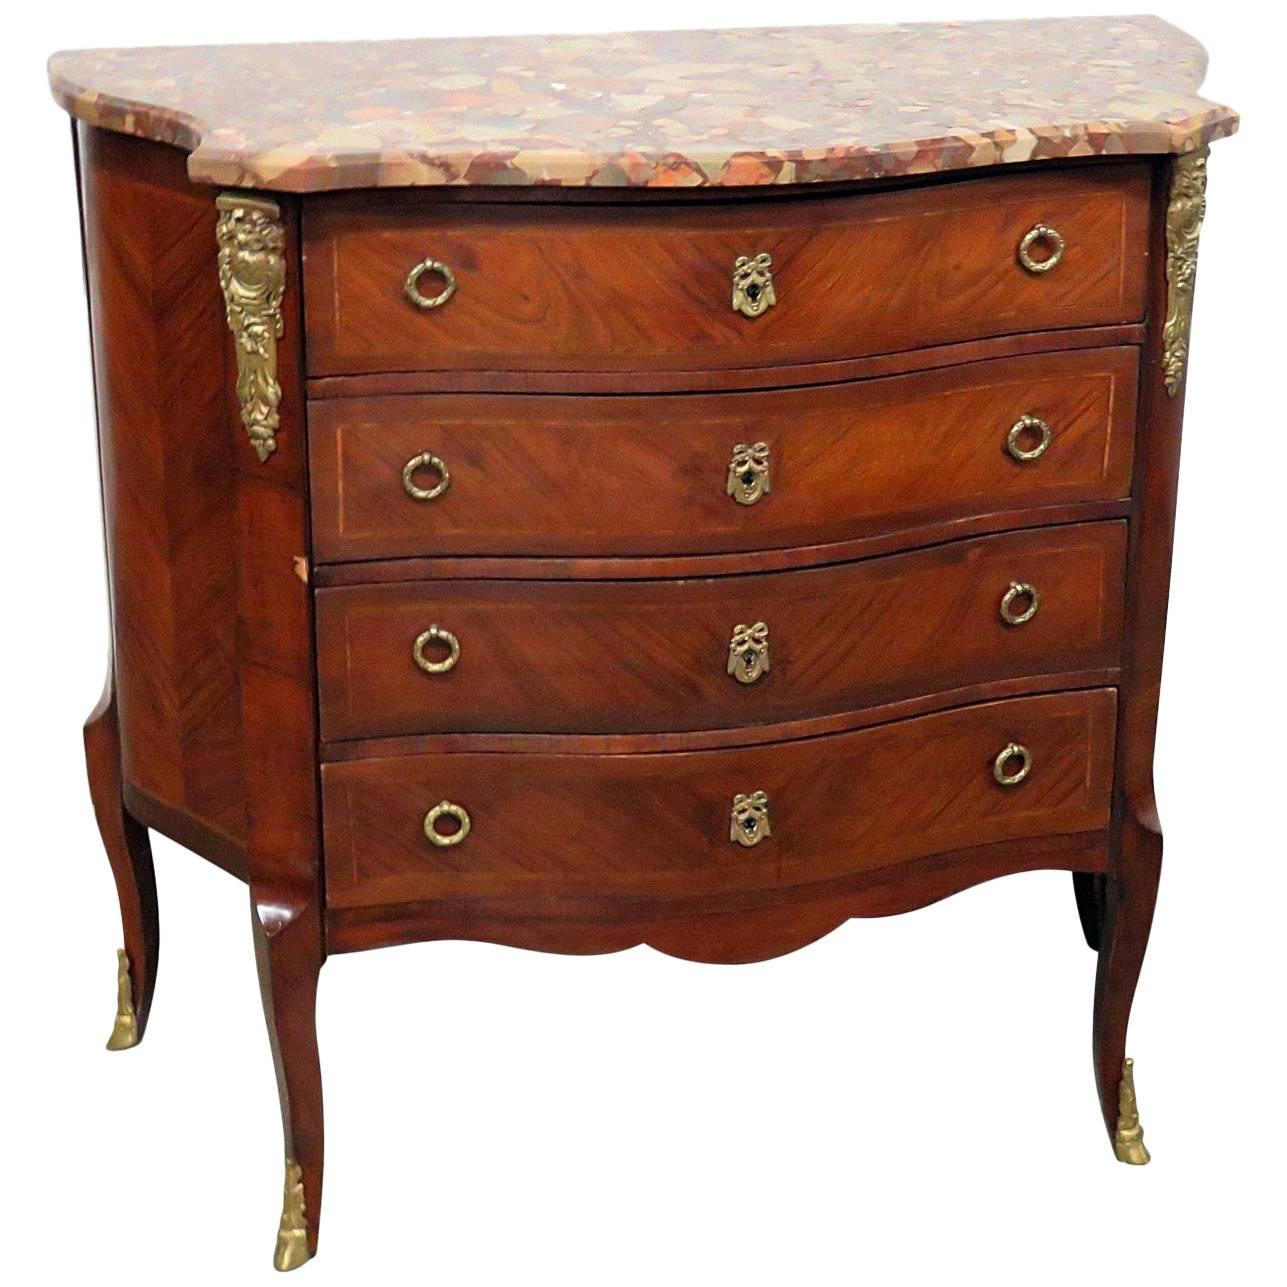 19th Century Jansen Style Marble-Top Commode